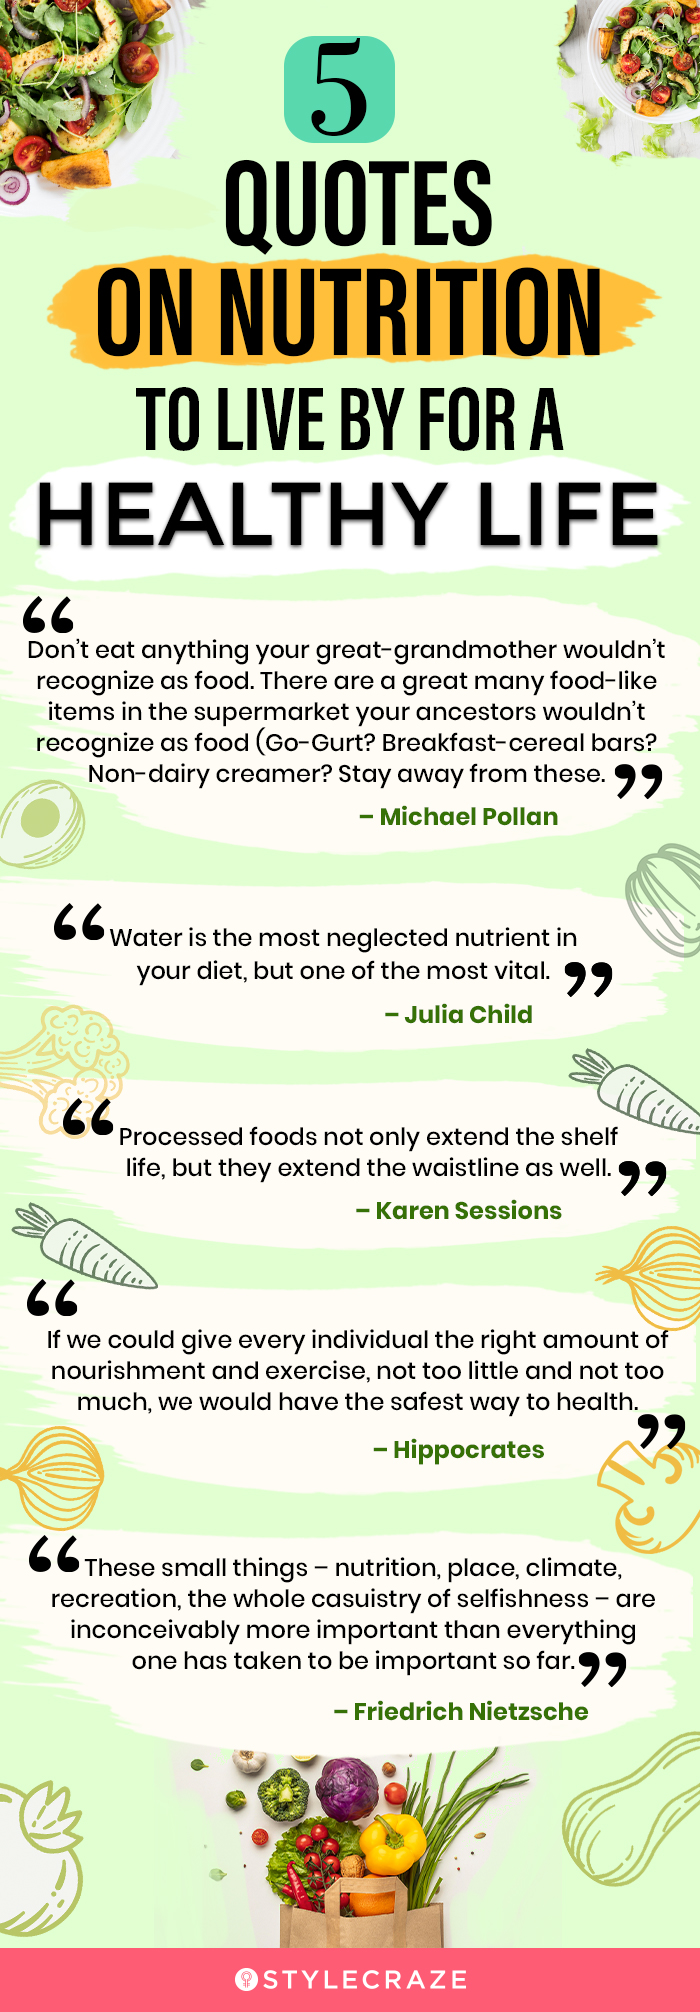 5 quotes on nutrition to live by for a healthy life (infographic)